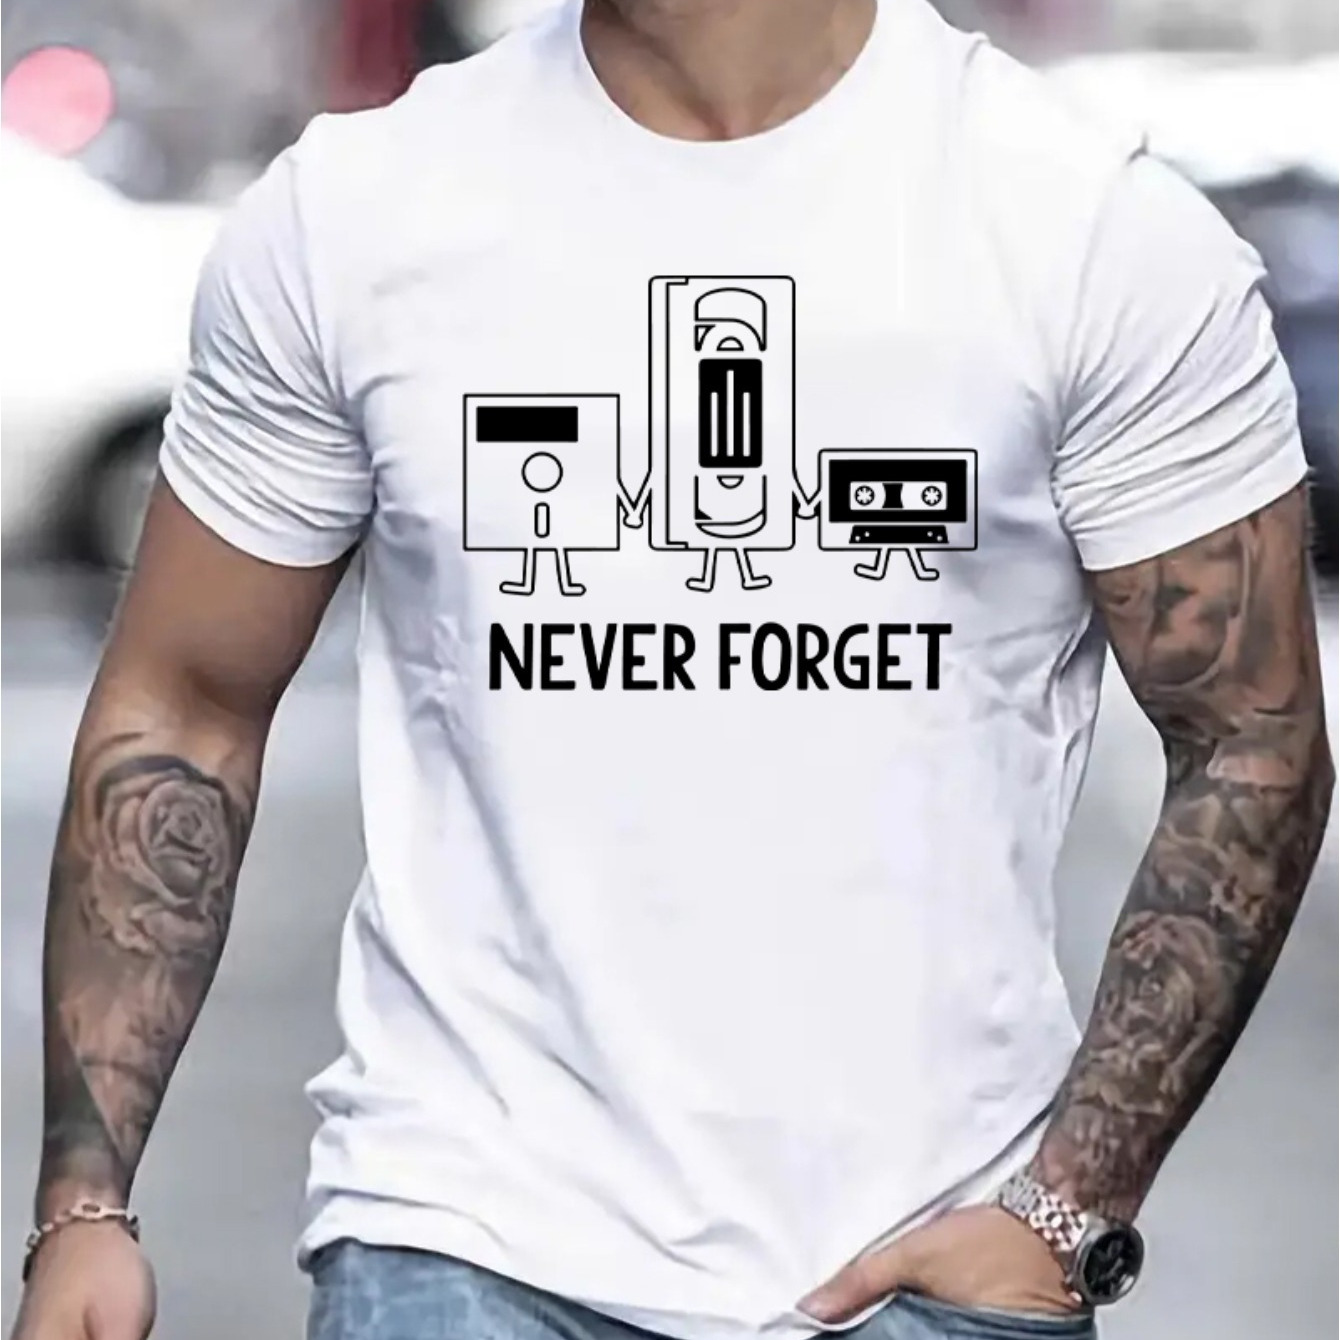 

Never Forget And Anime Appliances Graphic Print, Men's Novel Graphic Design T-shirt, Casual Comfy Tees For Summer, Men's Clothing Tops For Daily Activities